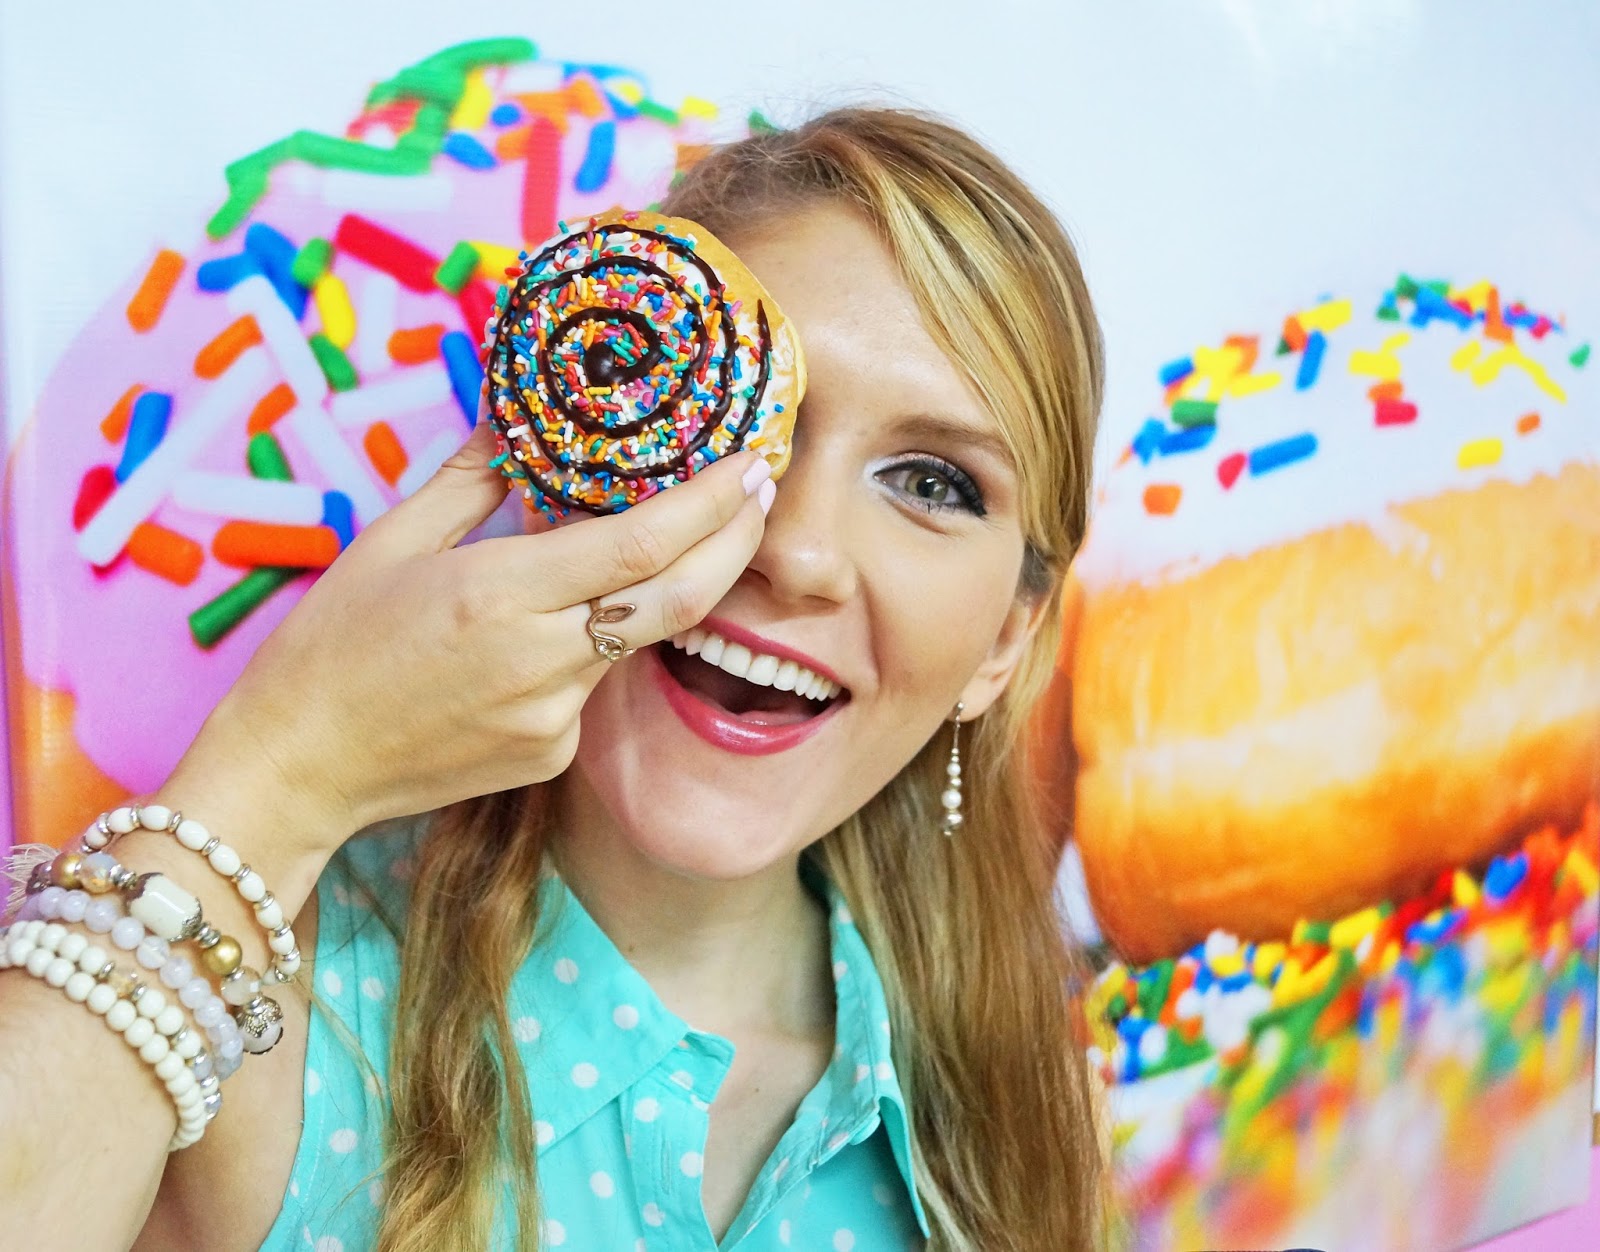 Doughnuts are the secret to Happiness!